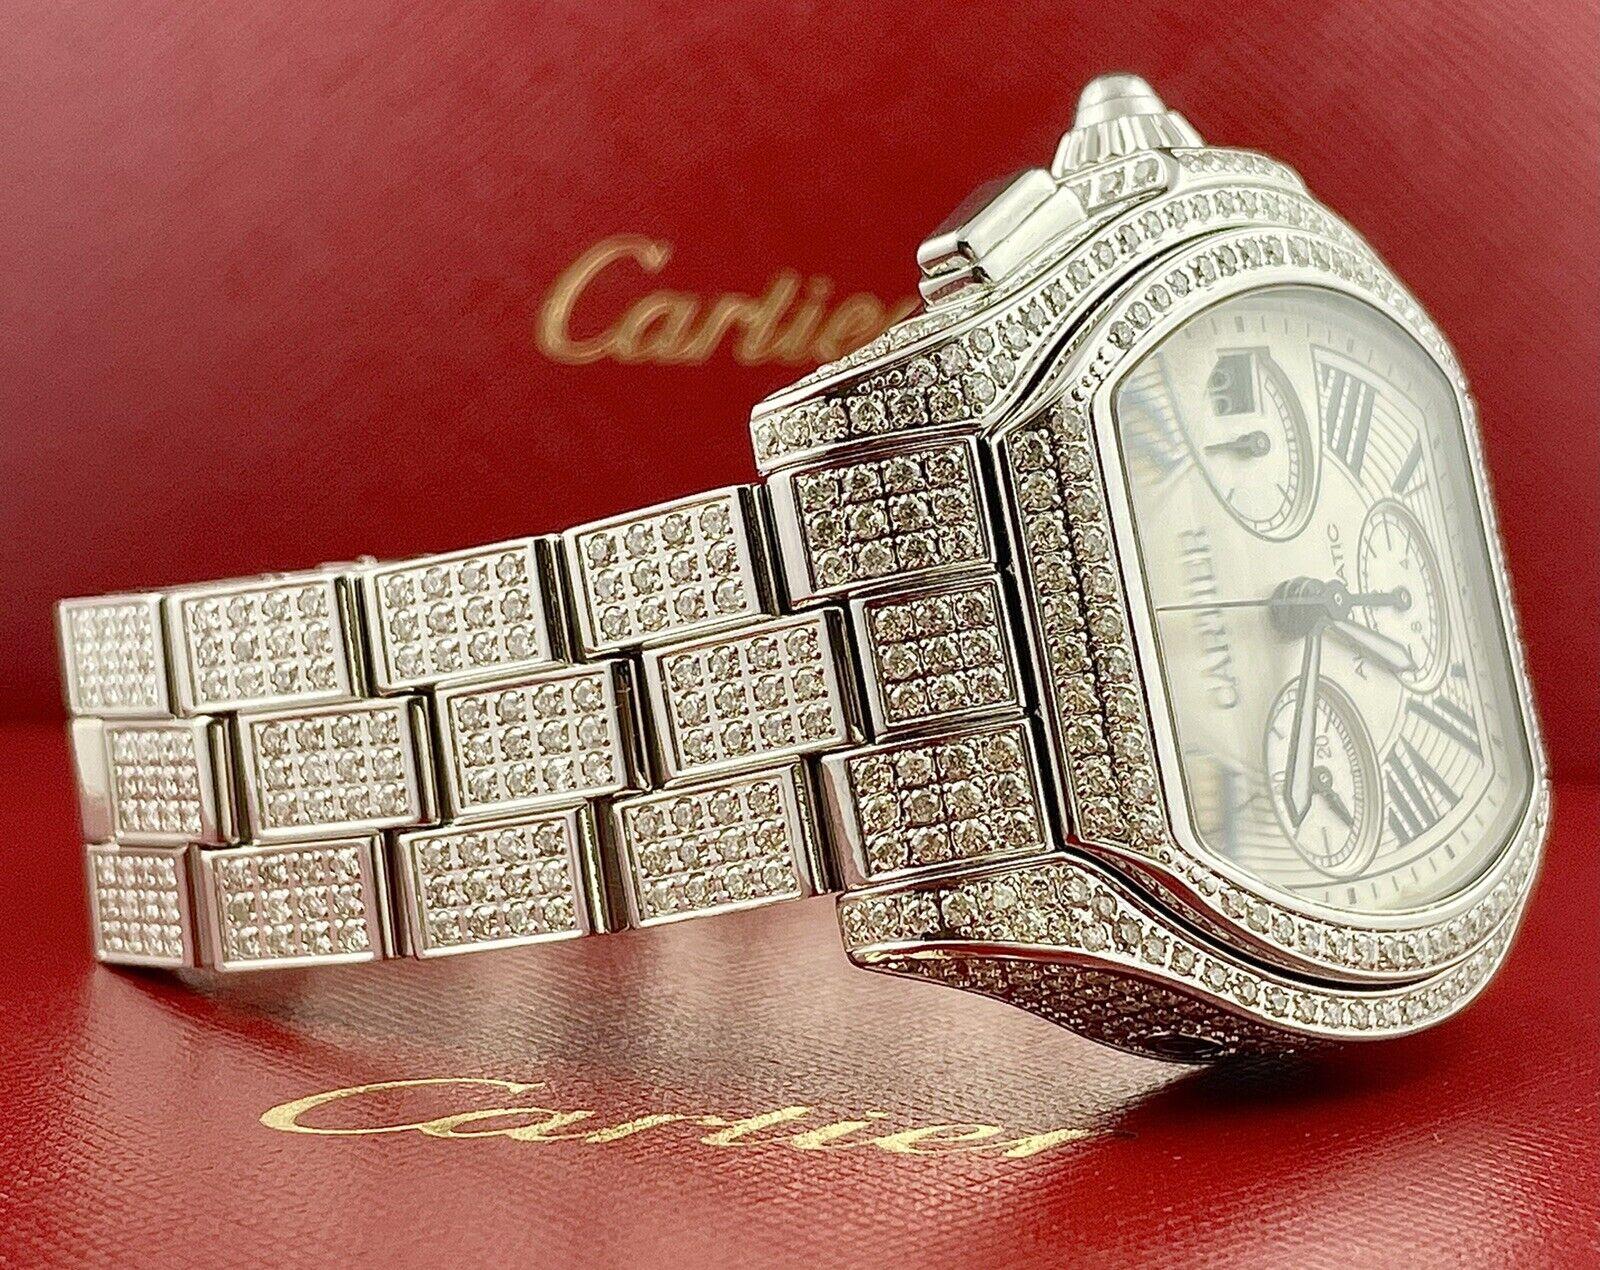 Cartier Roadster 44mm Watch. A Pre-owned watch w/ Gift box. Watch is 100% Authentic and Comes with Authenticity Card. Watch Reference is 3405 and is in Excellent Condition (See Pictures). The Dial color is White, and the Material is Stainless Steel.